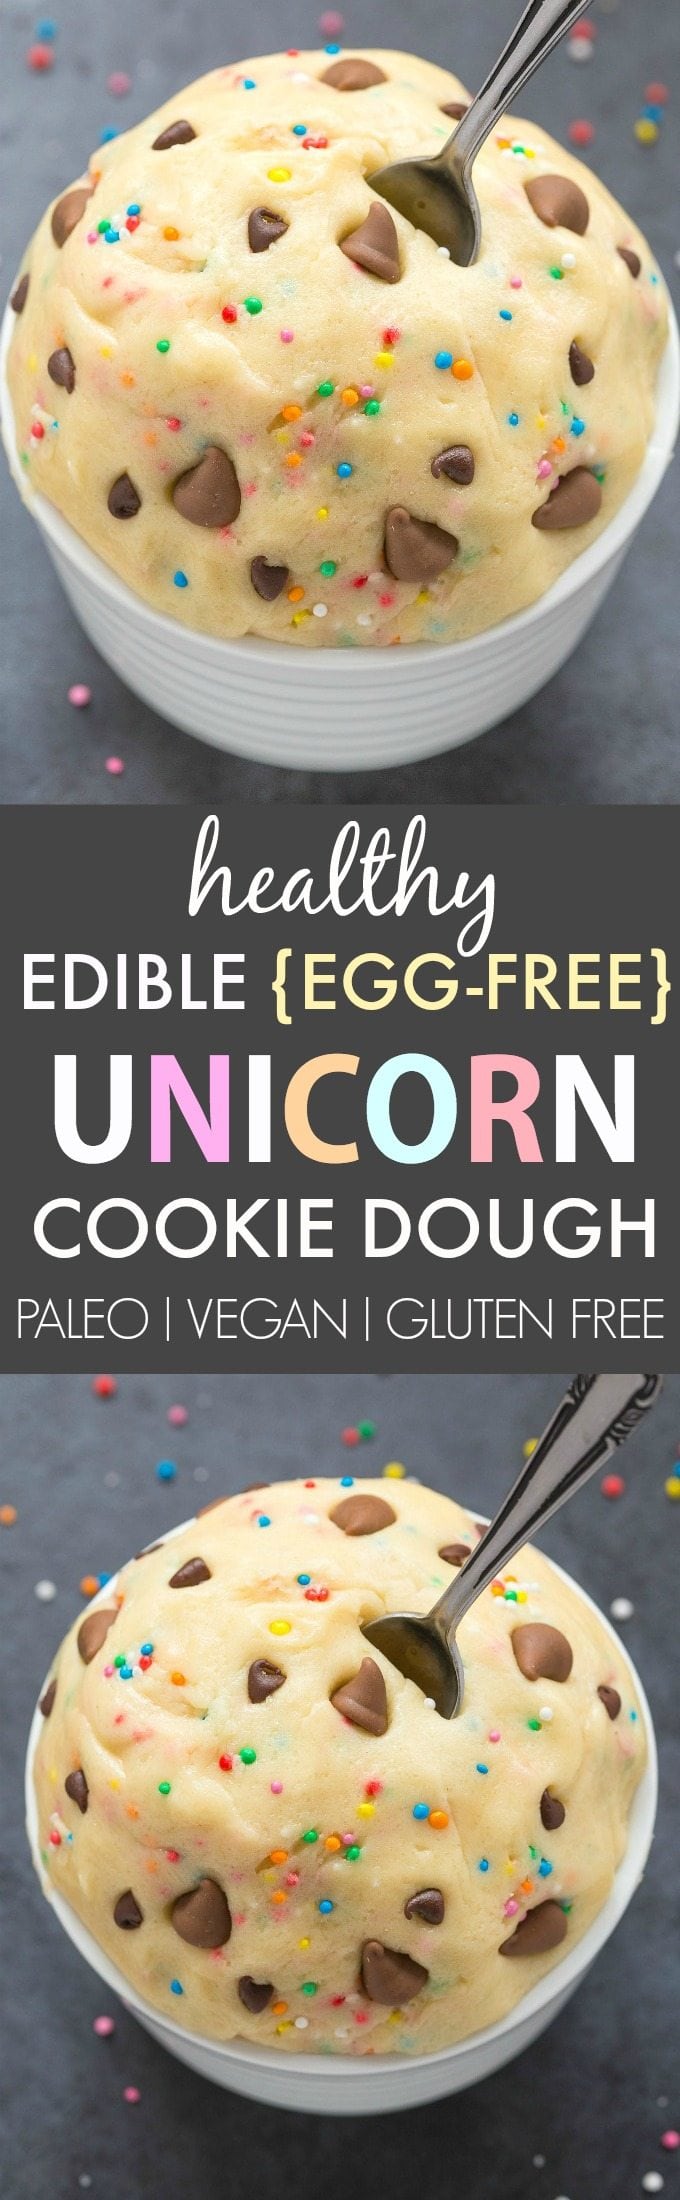 Healthy Edible Egg-Free Unicorn Cookie Dough (V, GF, DF, P)- Easy guilt-free and edible flourless cookie dough inspired by the unicorn frappuccino- Ready in 5 minutes and NO beans! {vegan, gluten free, paleo recipe}- thebigmansworld.com